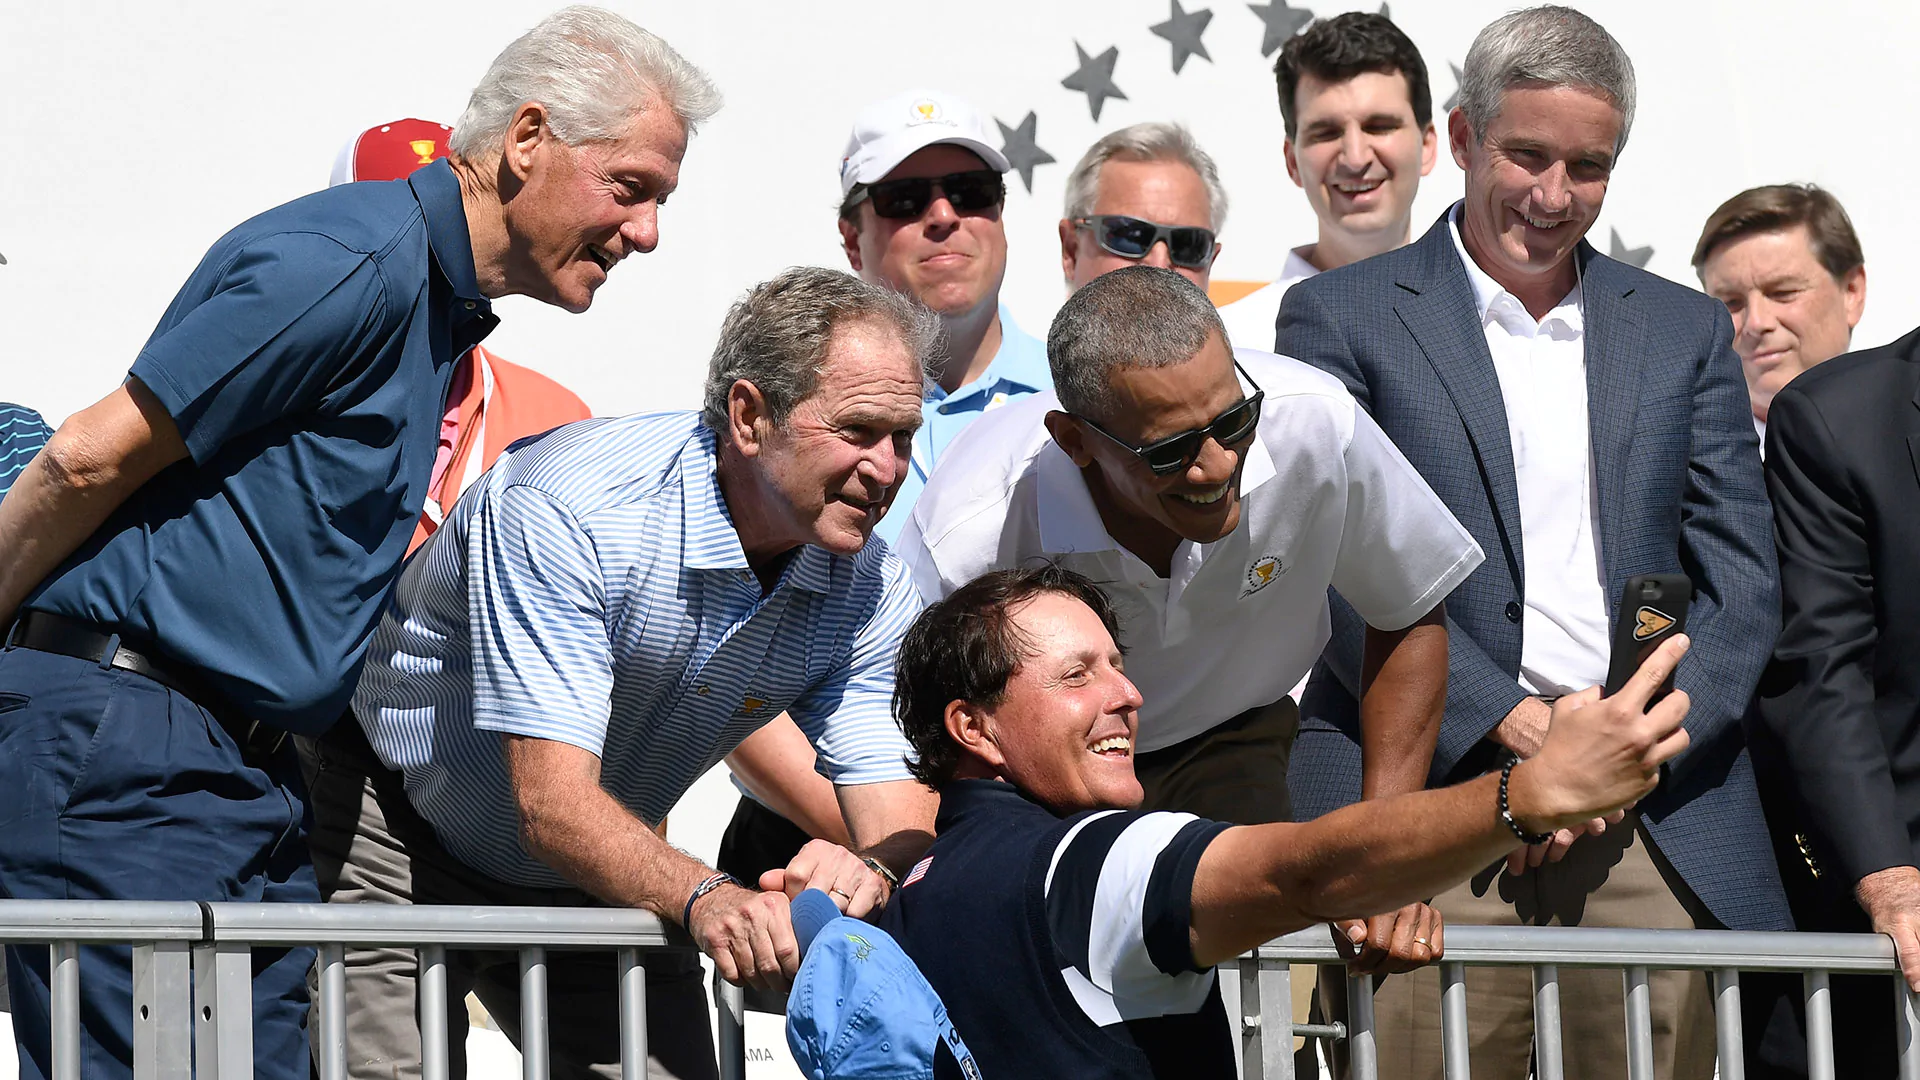 Phil takes selfie with Obama, Clinton and Bush